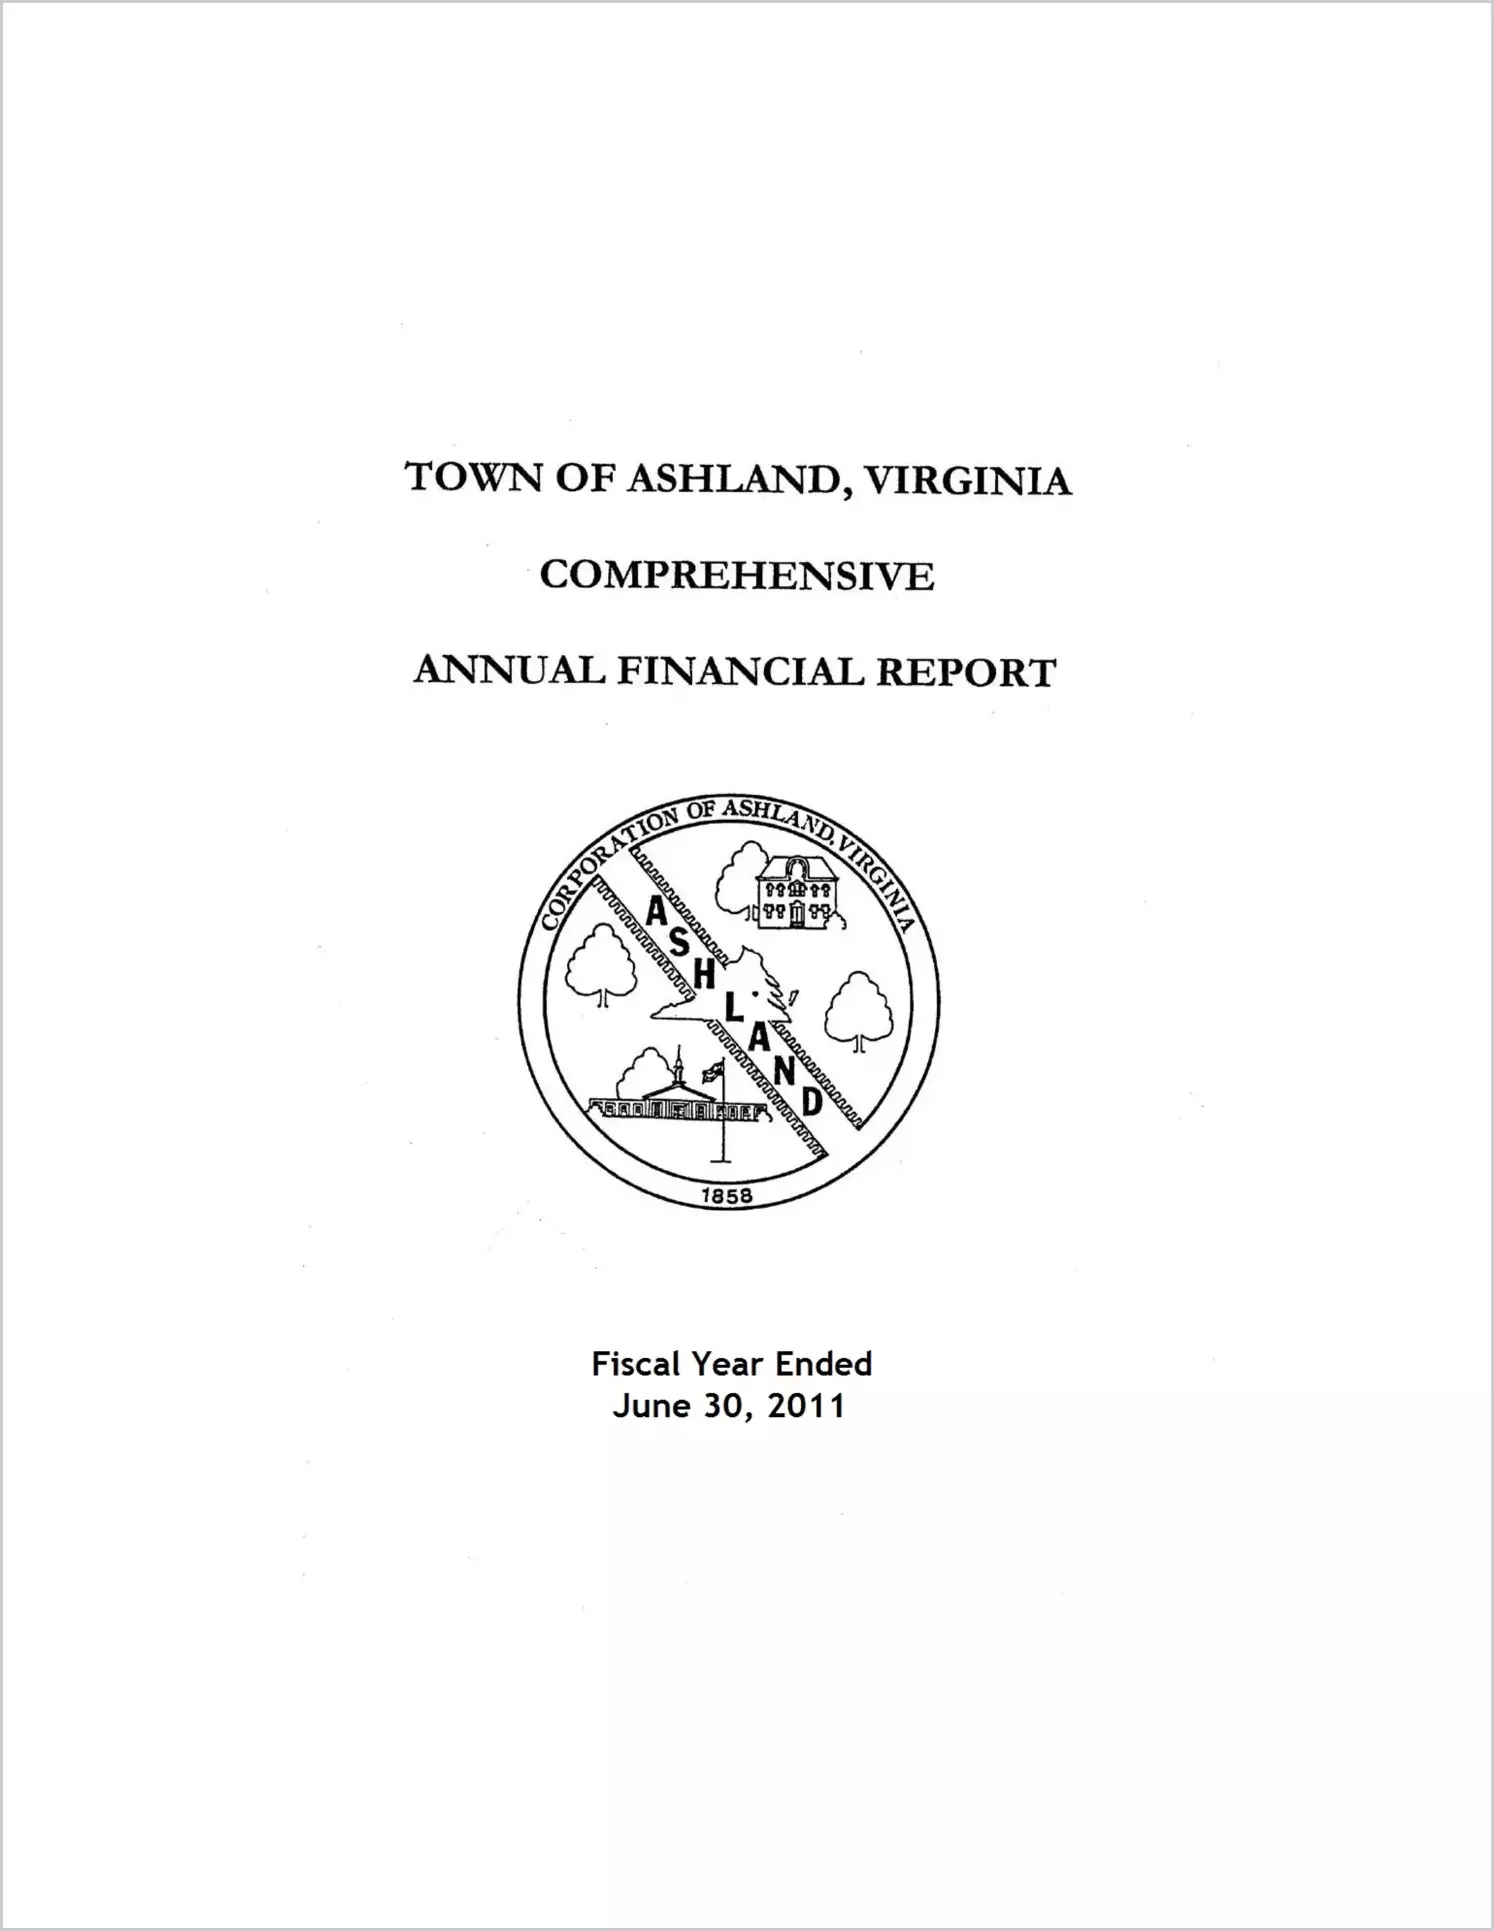 2011 Annual Financial Report for Town of Ashland